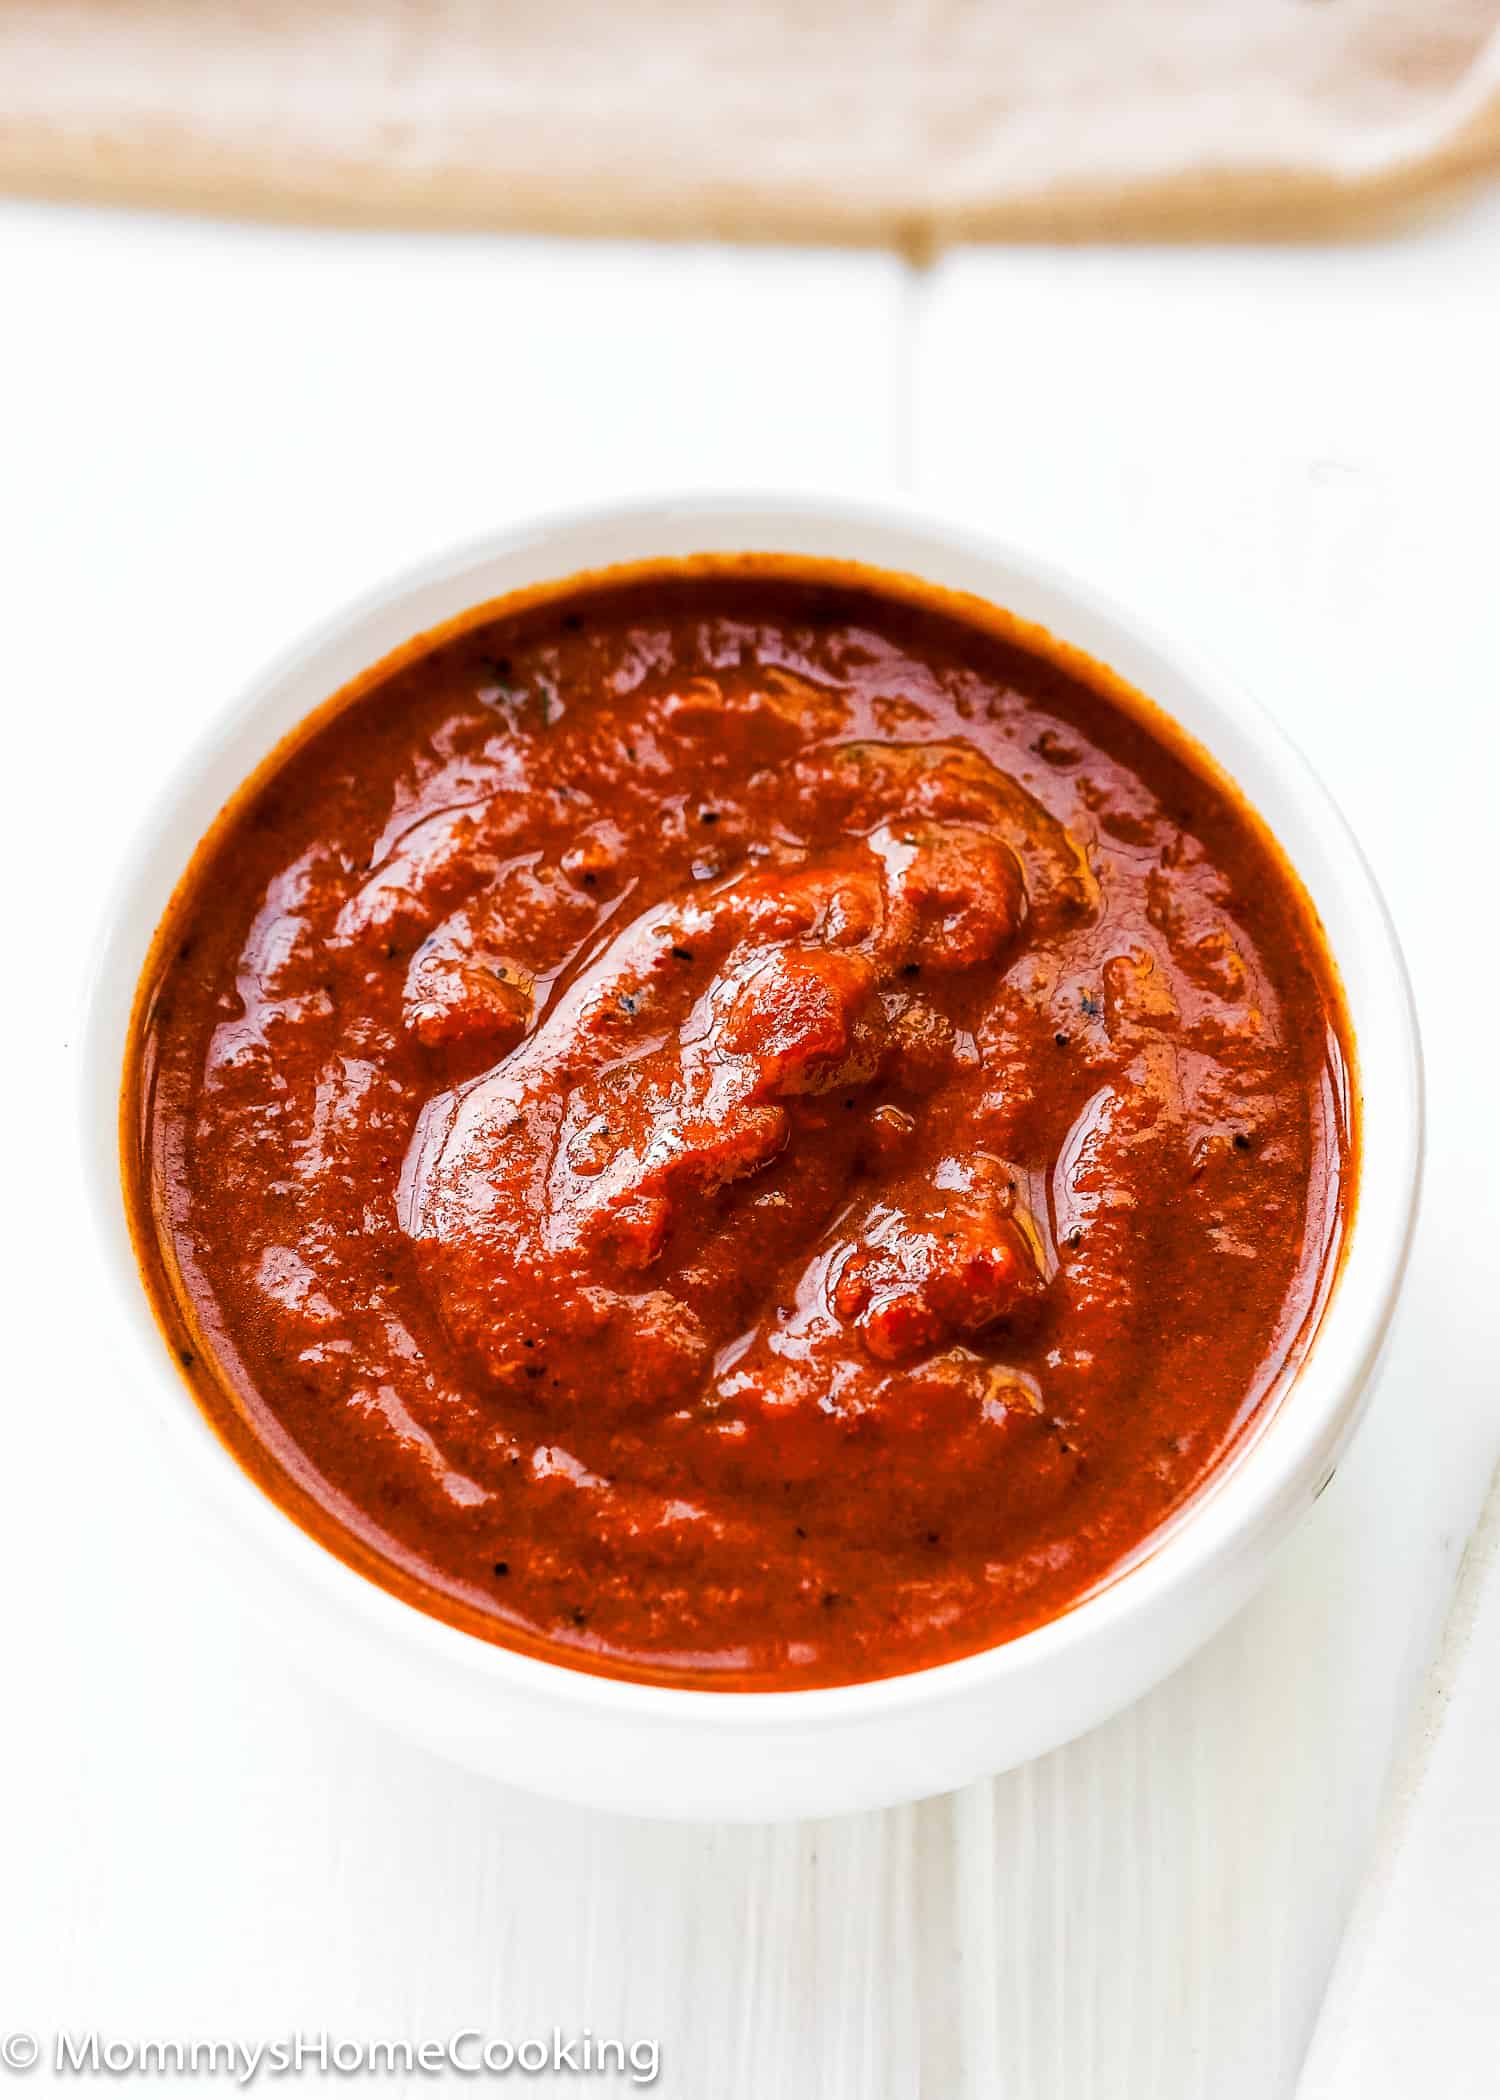 chipotle peppers in abodo sauce in a small white bowl.